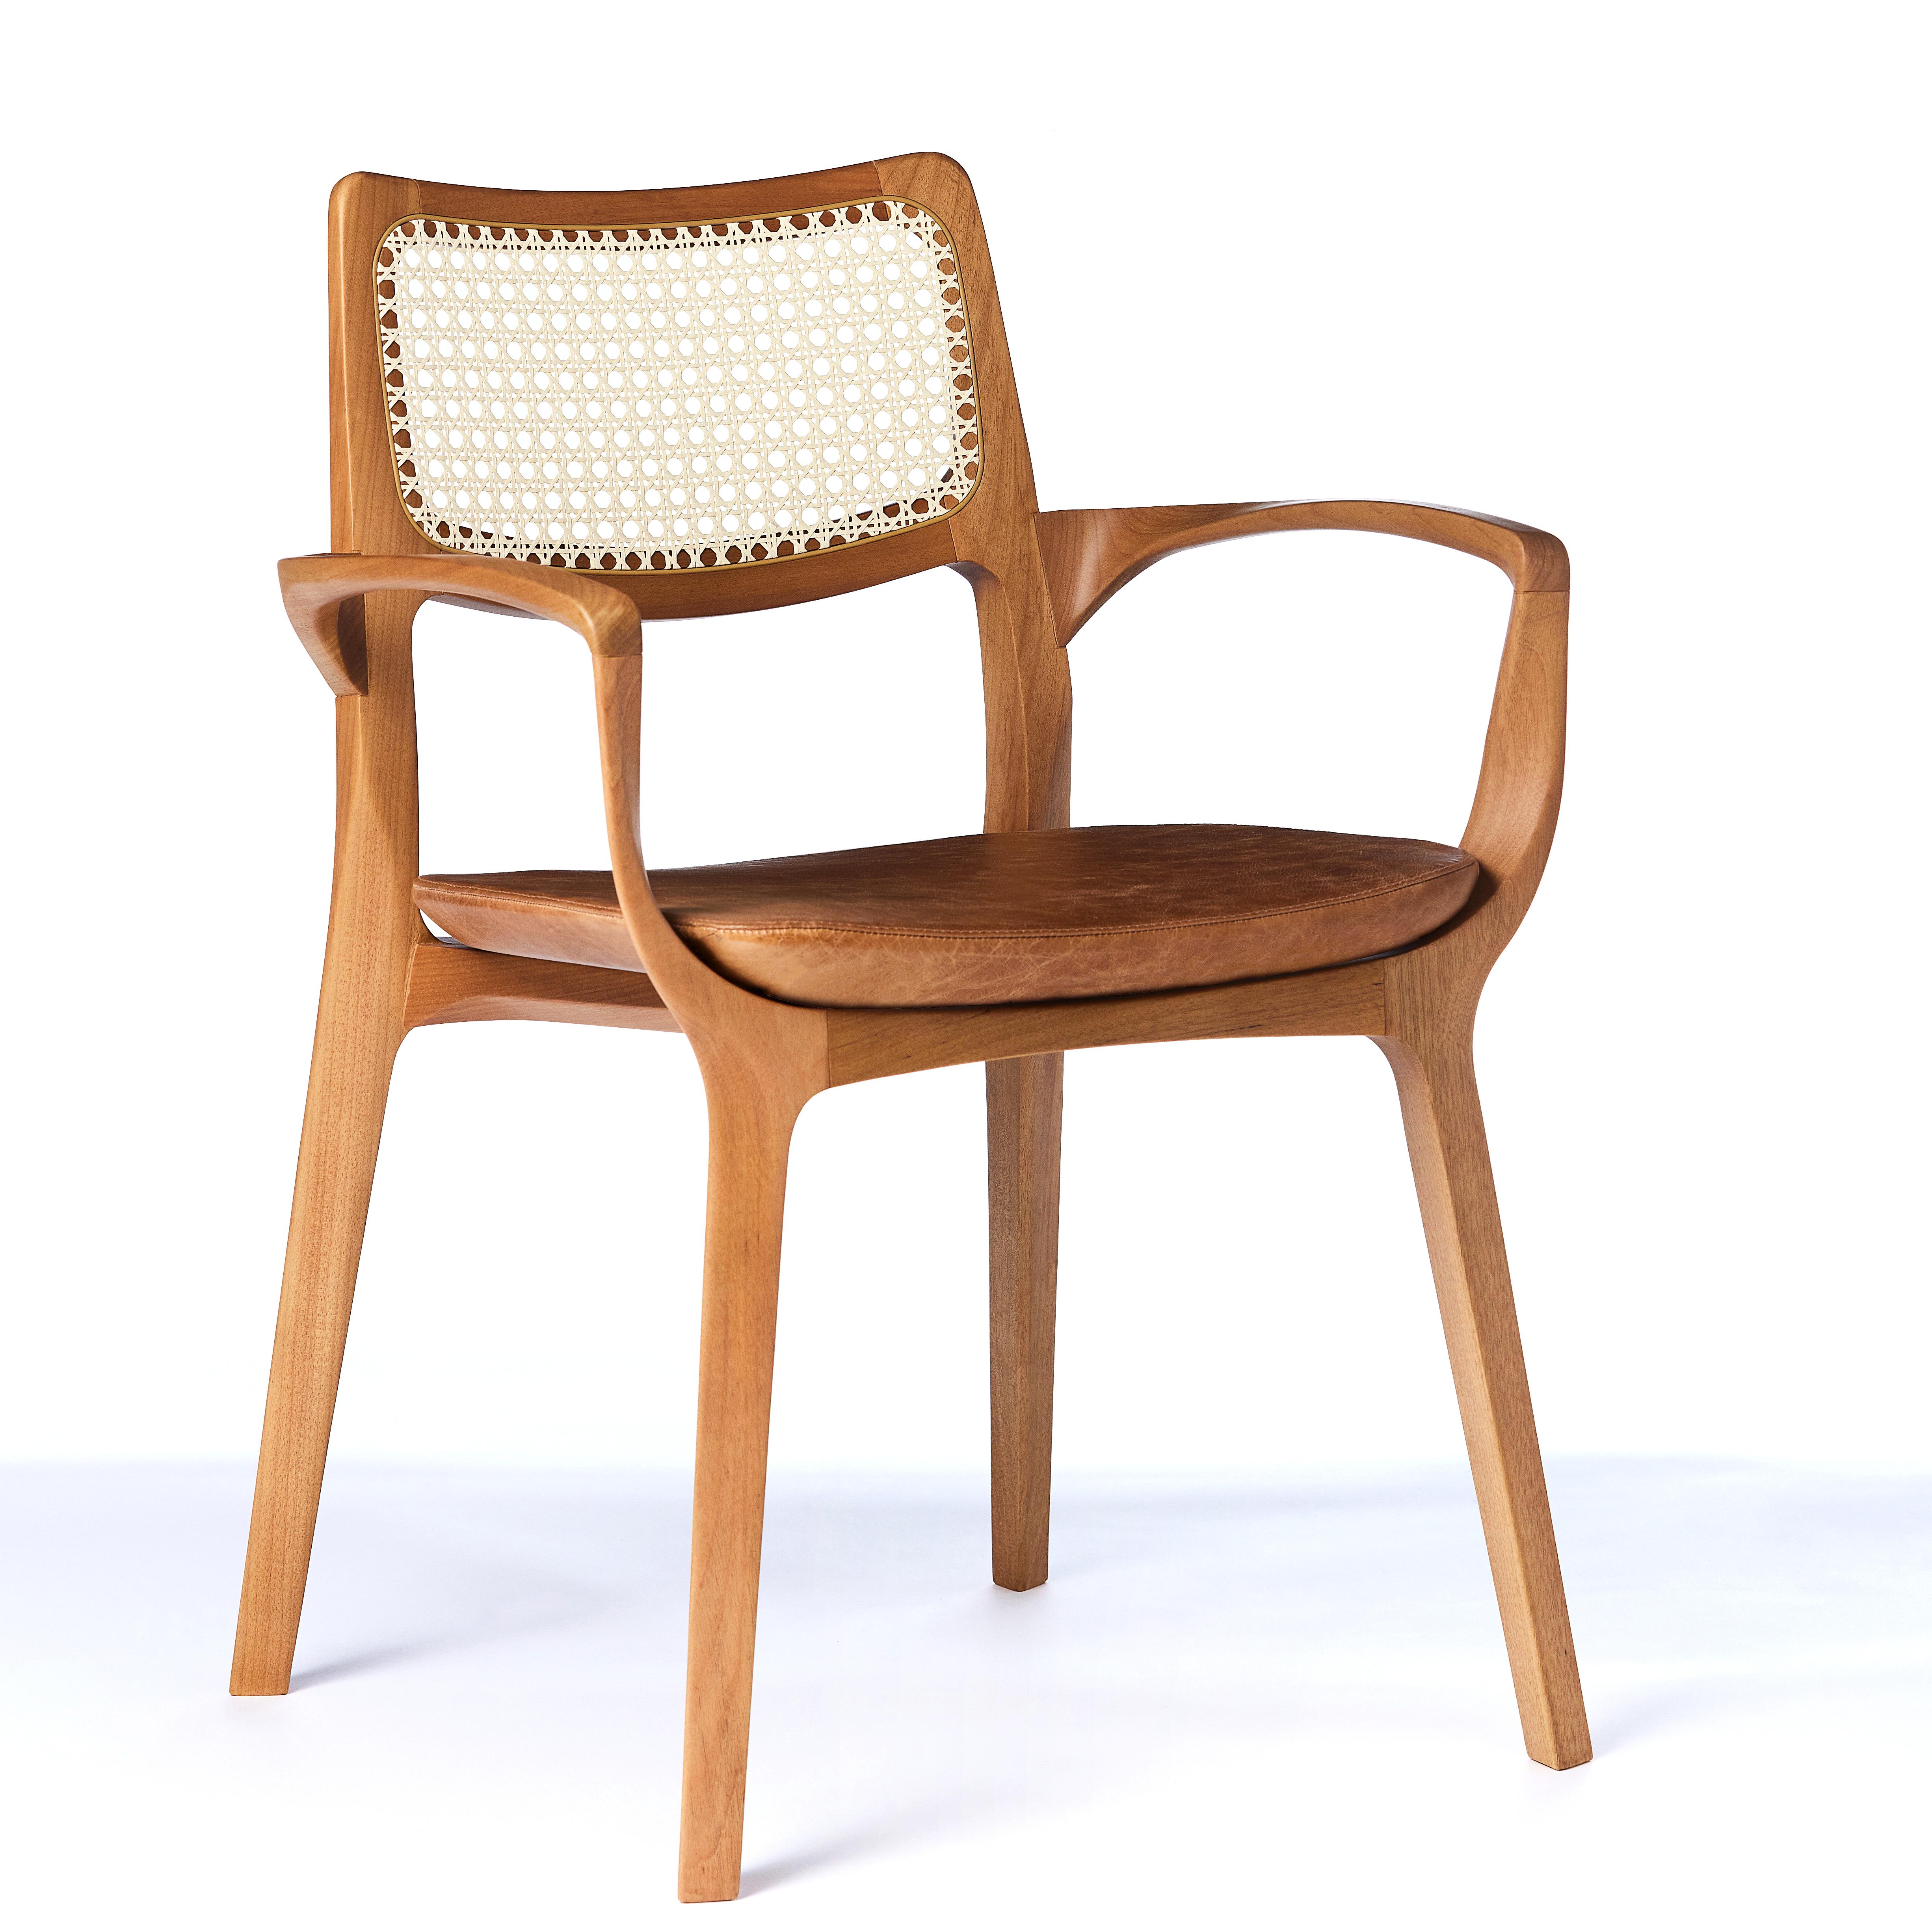 The Moderns Aurora Chair Sculptured in Walnut Finish Arms, leather seating, cane en vente 5